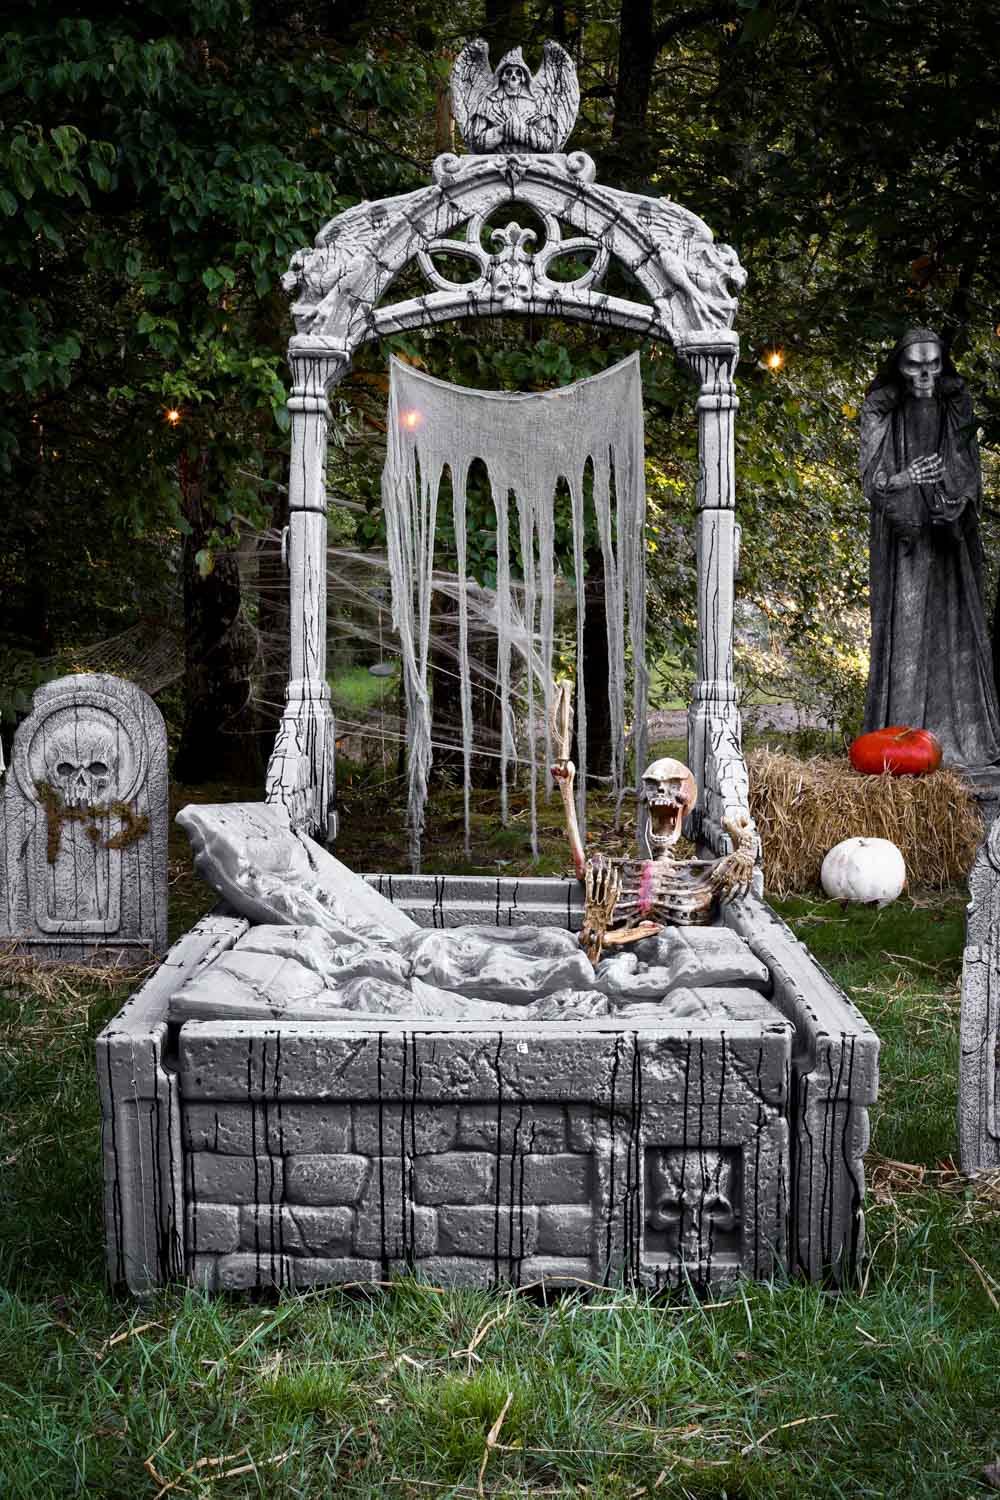 A skeleton bursting out of a crypt in a graveyard.